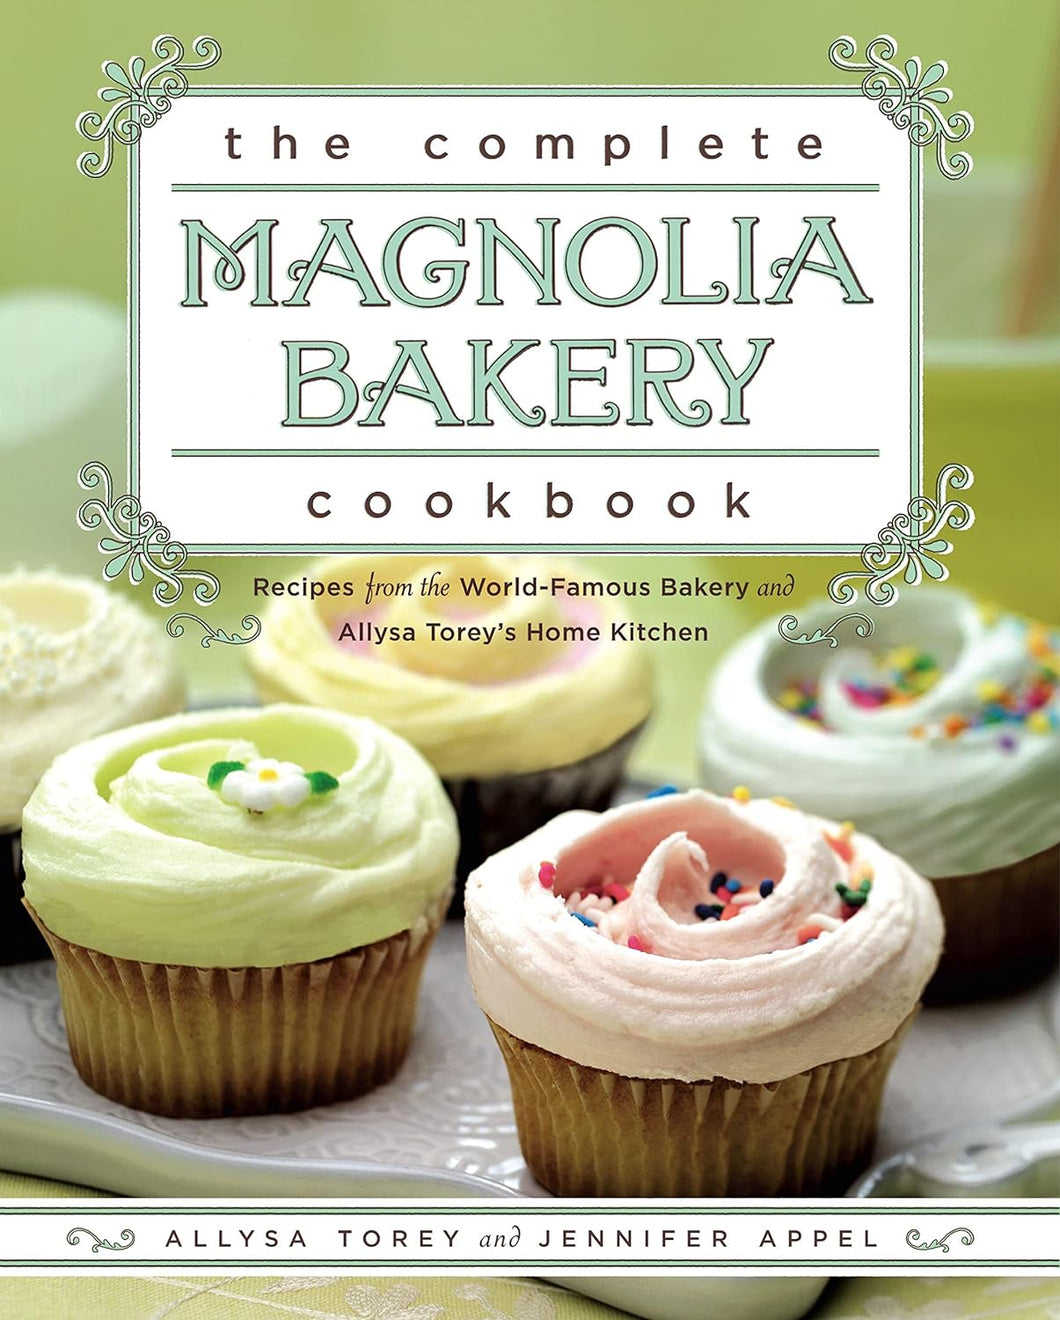 The complete Magnolia Bakery Cookbook Old Fashioned Recipes From New Yorks Sweetest Bakery by Jennifer Appel and Allysa Torey